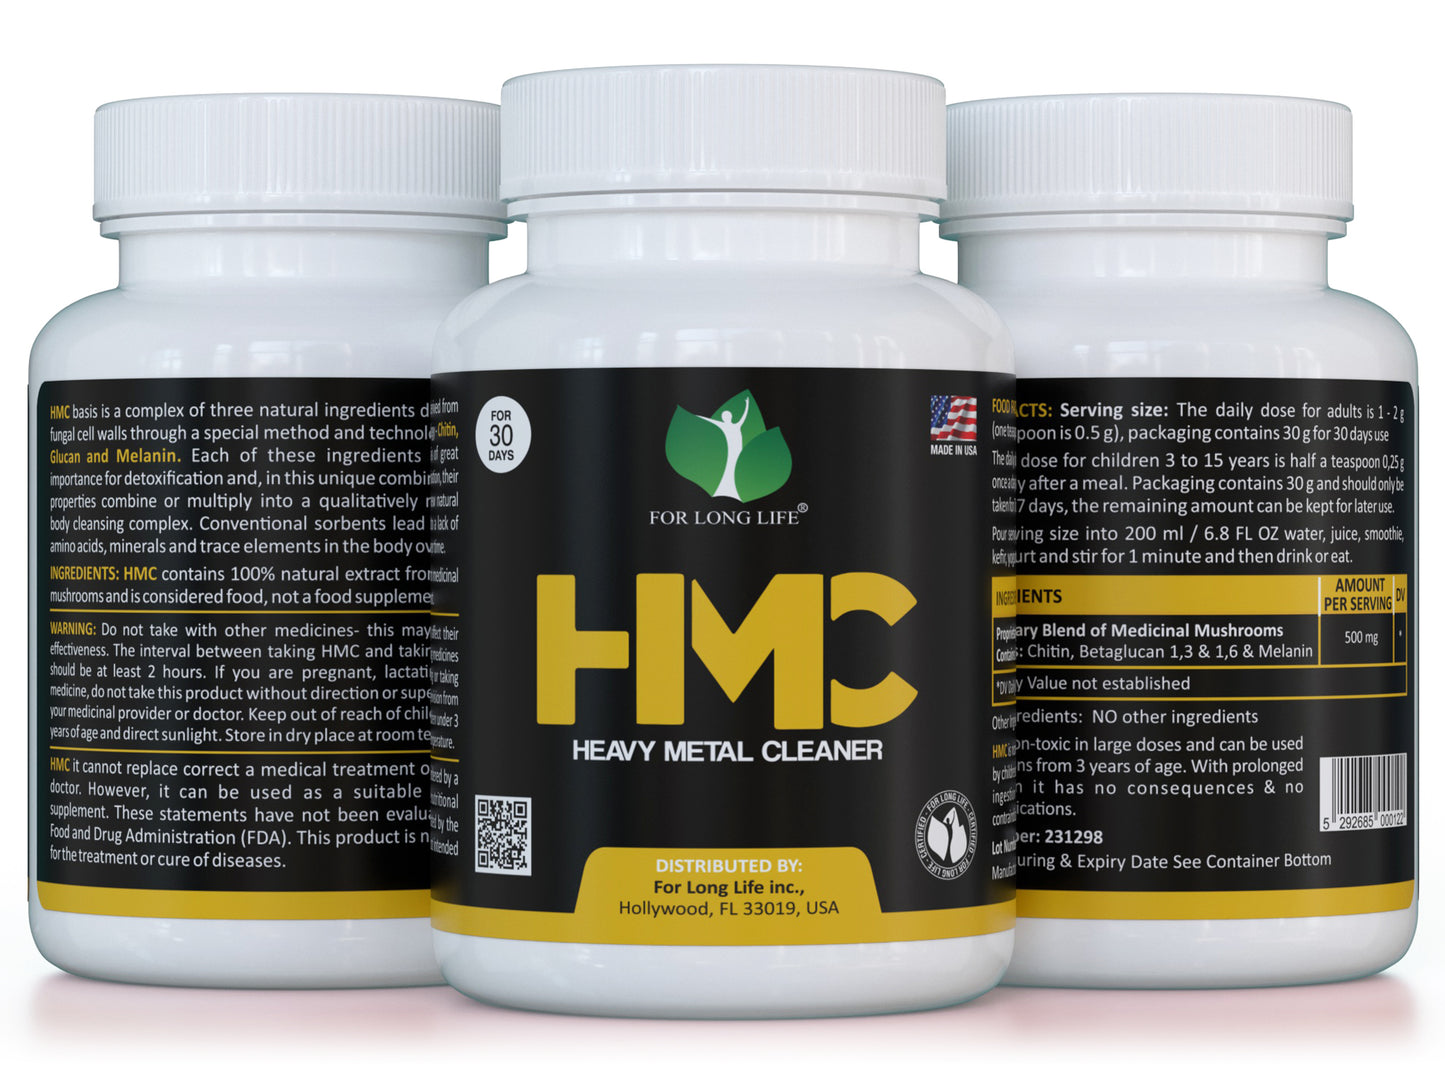 Detoxification of heavy metals from the body, dietary supplement - 30g - HMC